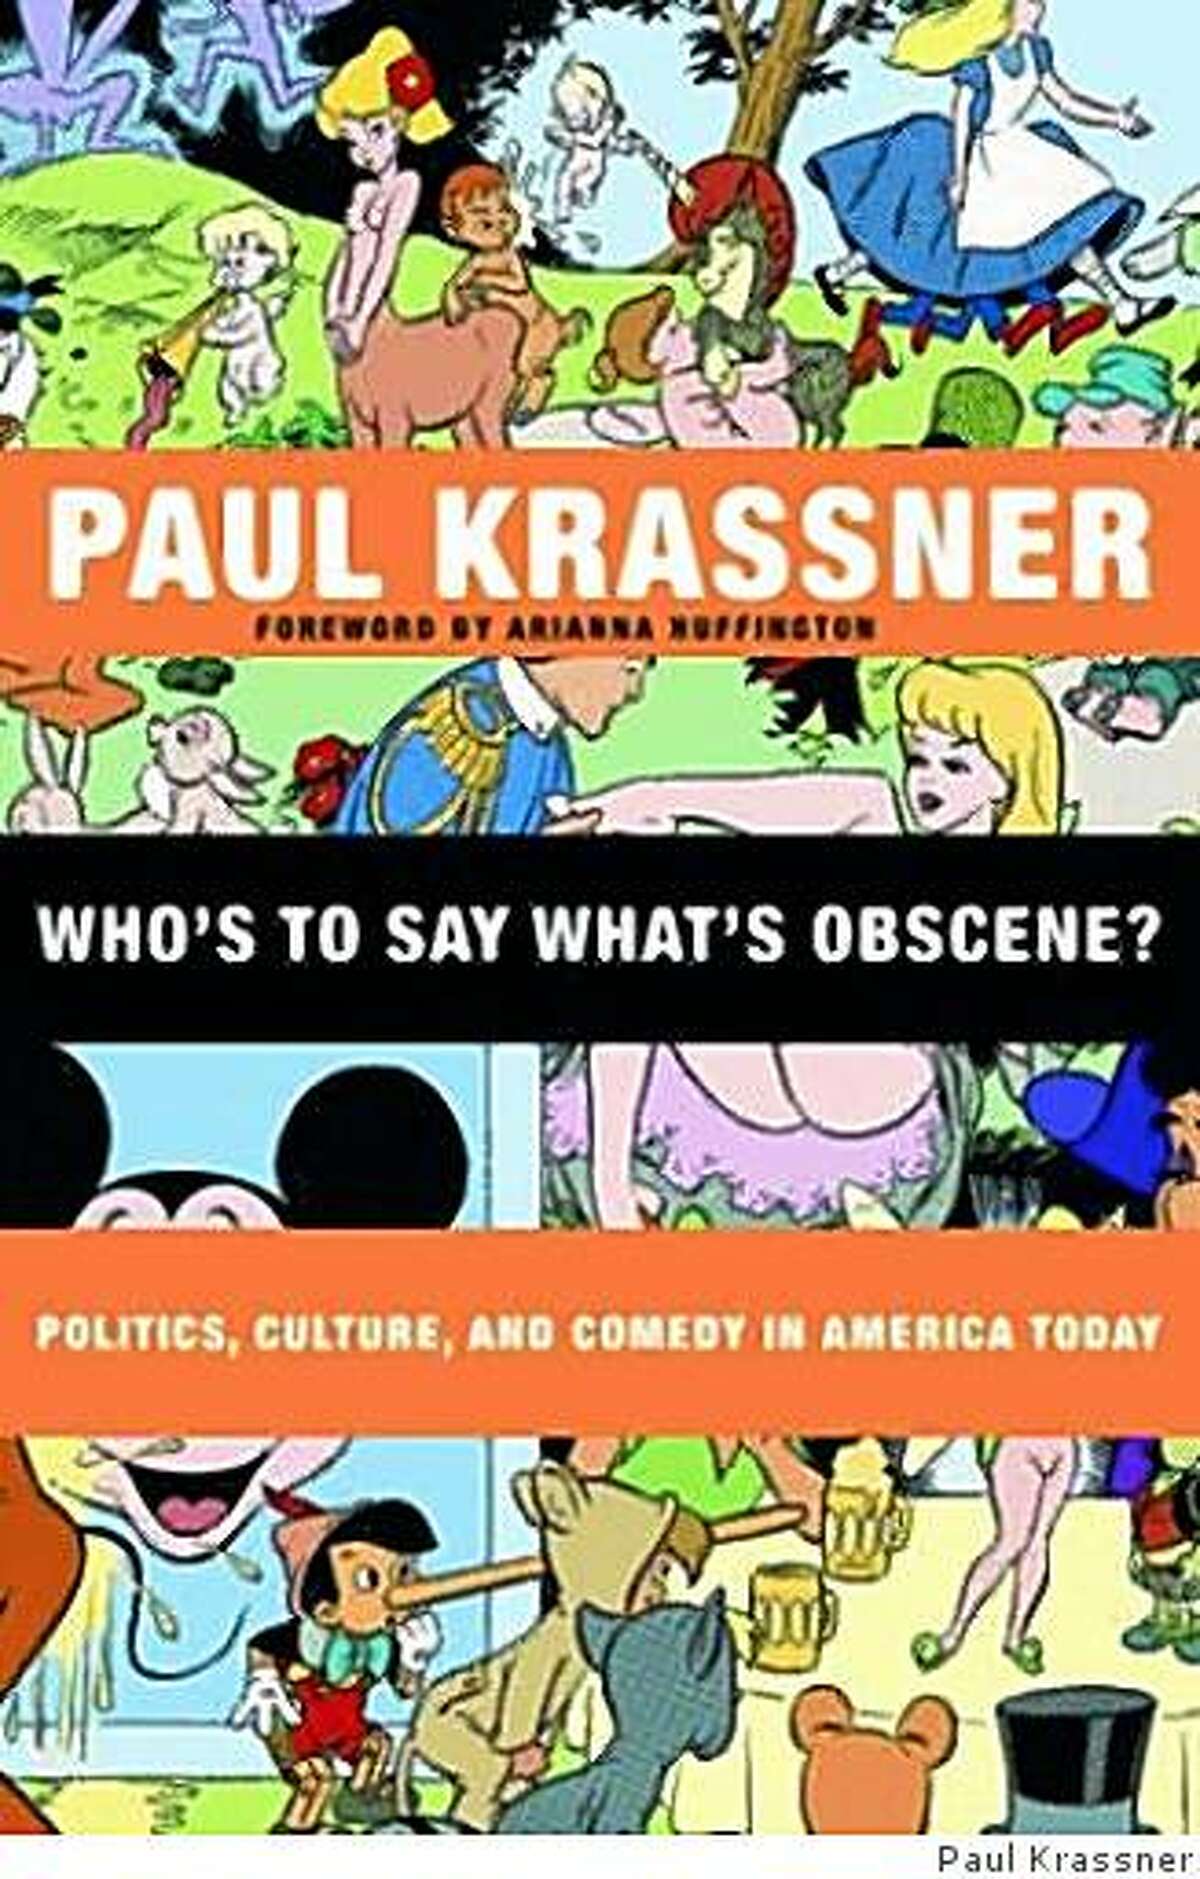 "Who's to Say What's Obscene" by Paul Krassner